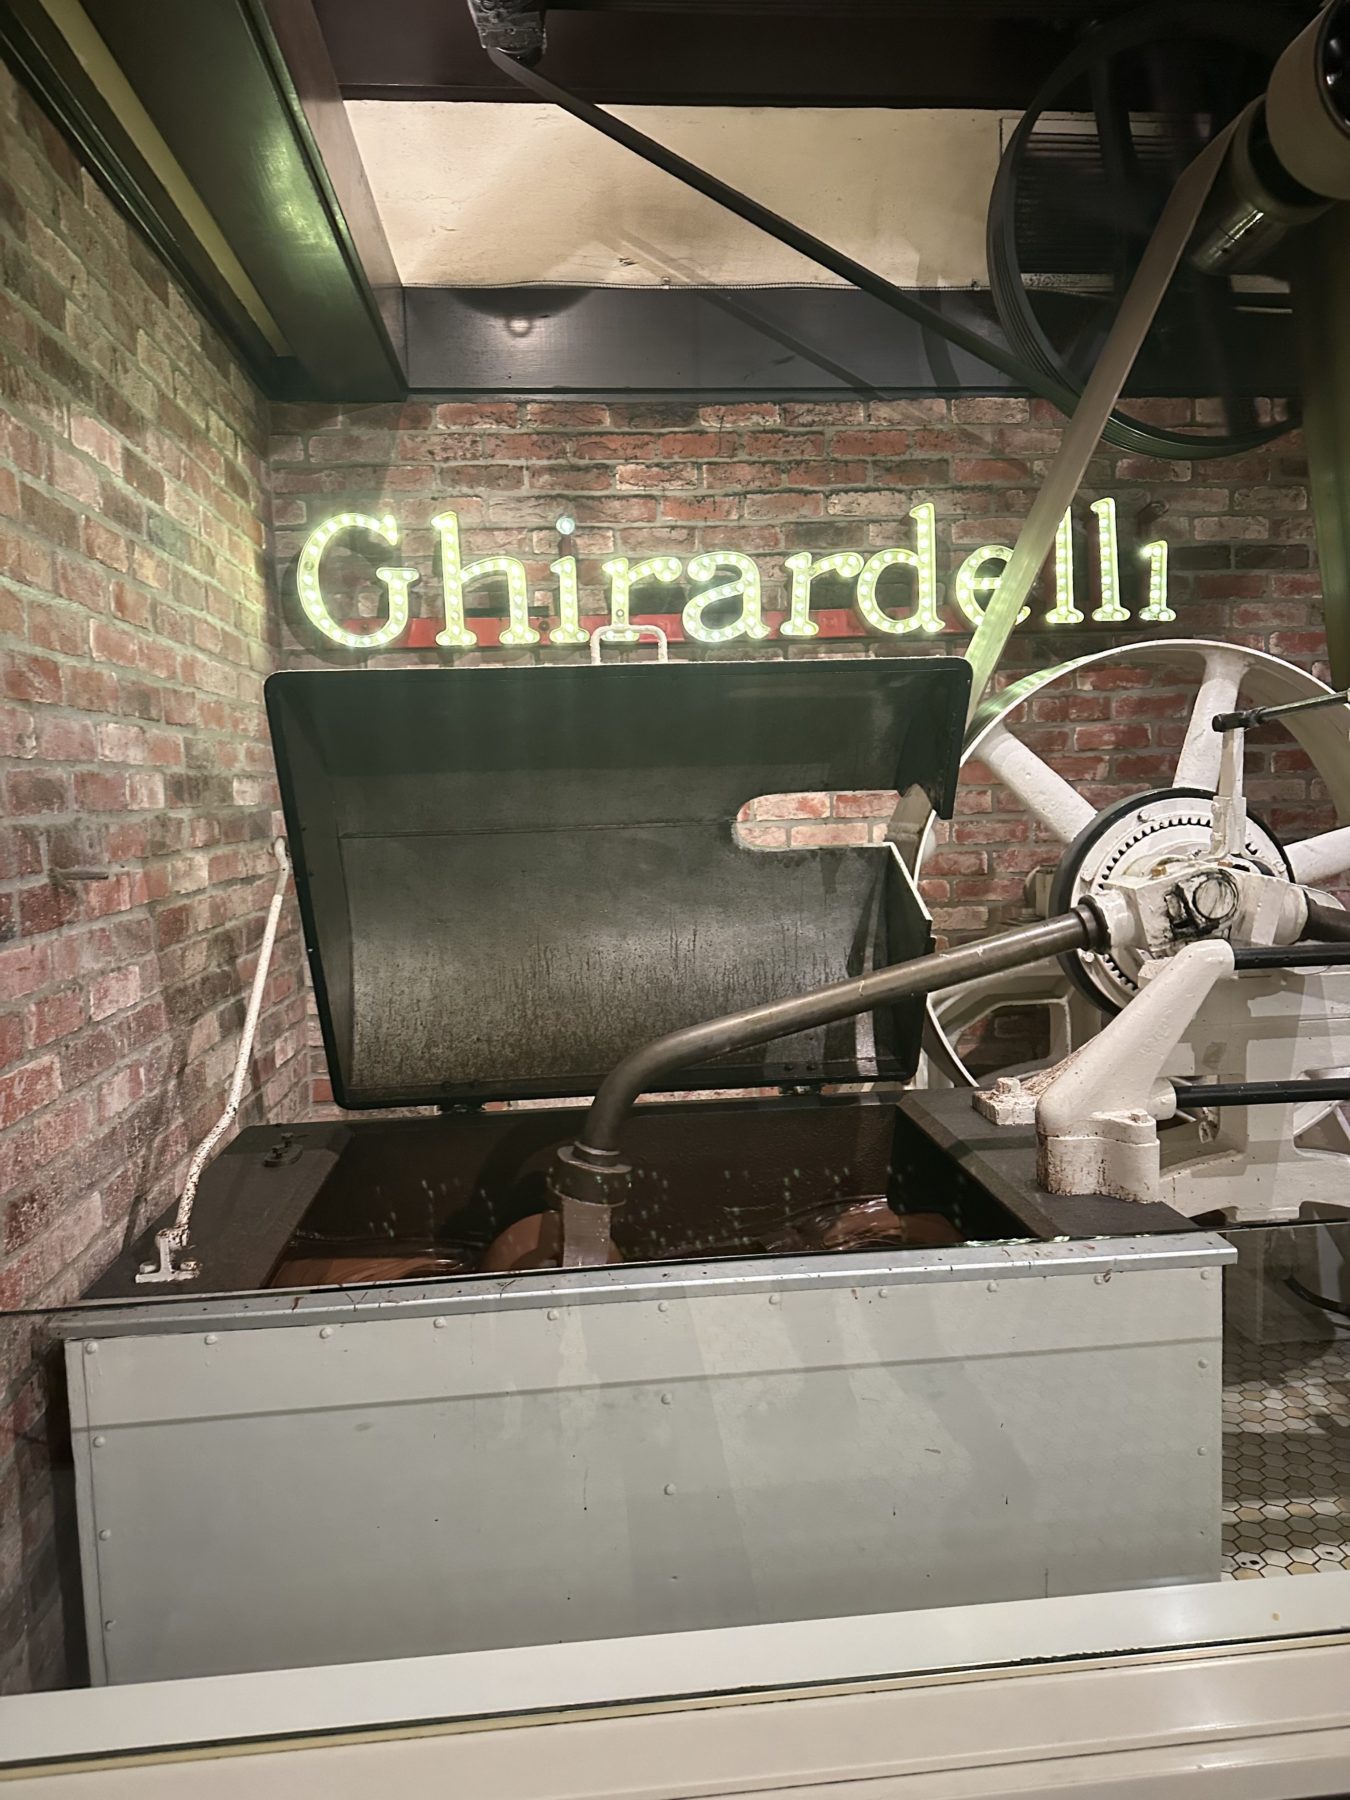 Ghiradelli Square things to do